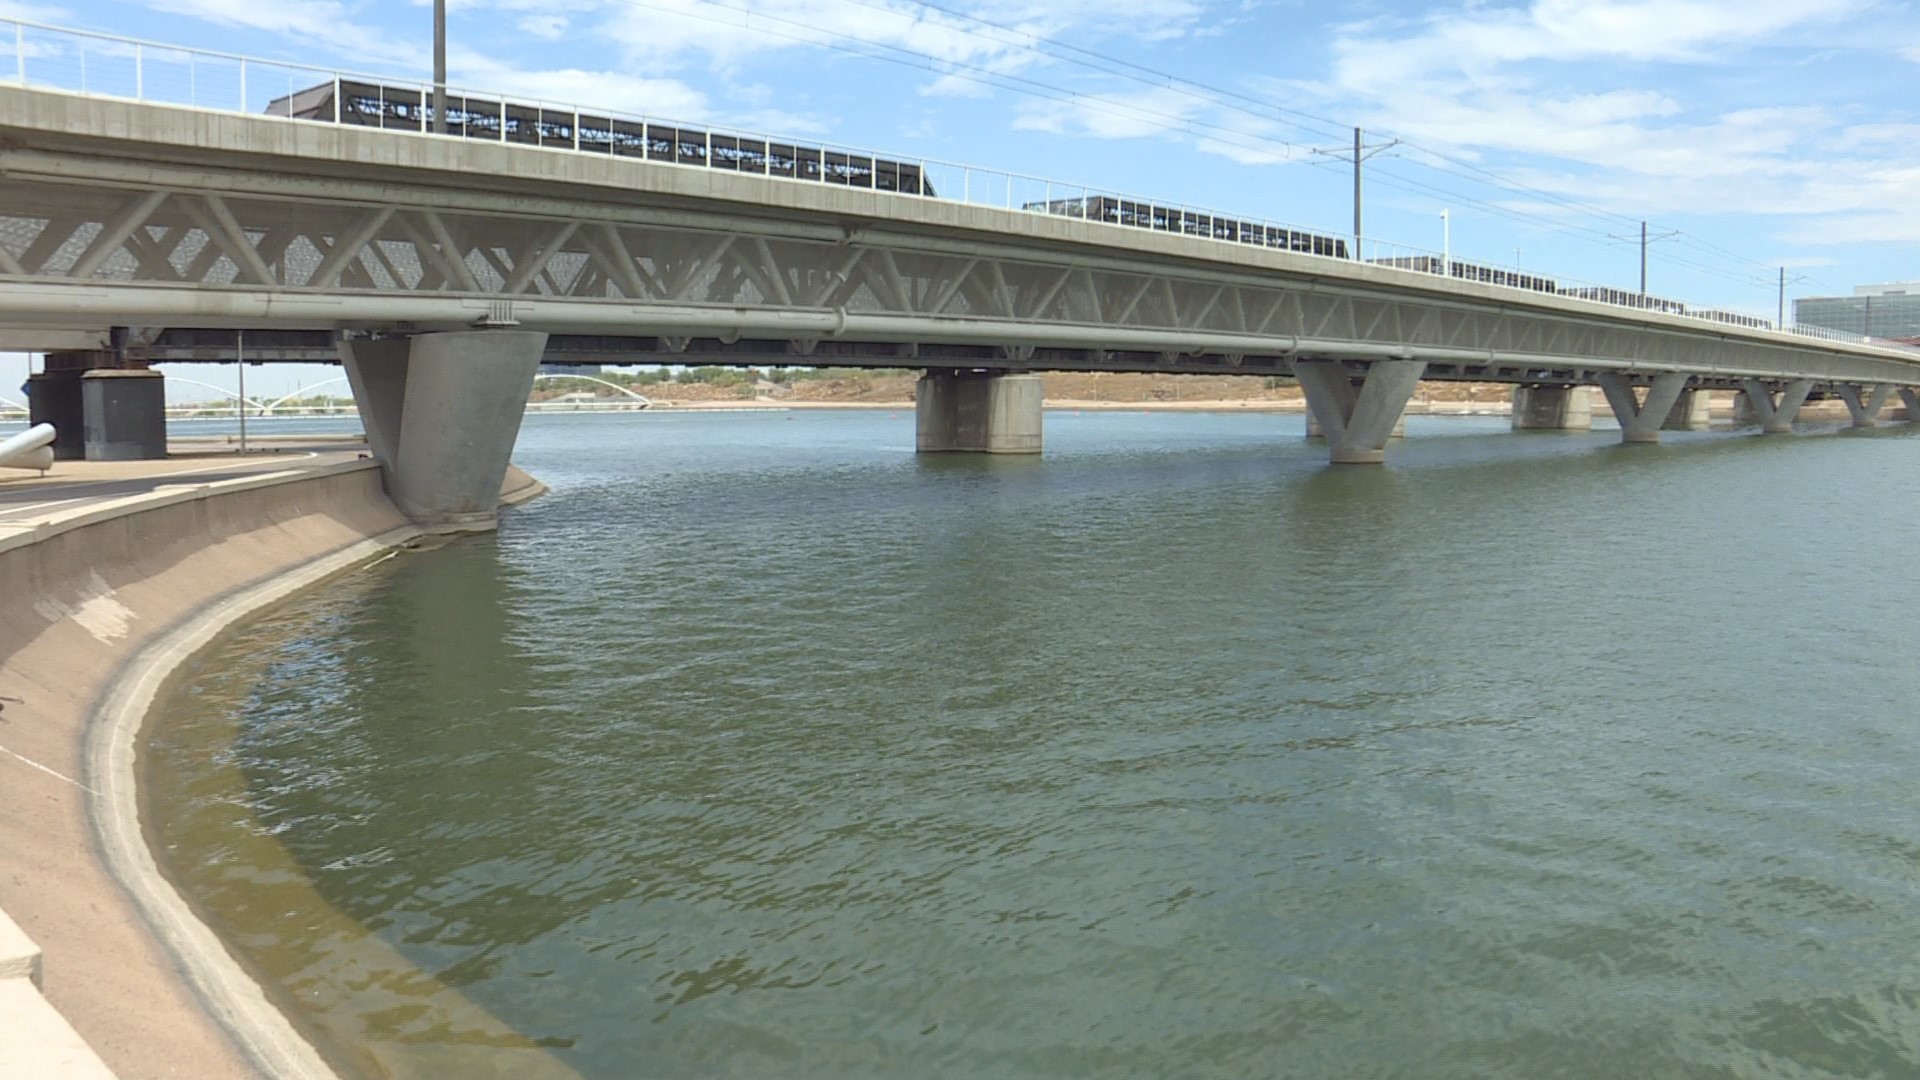 ADOT says the state's relatively dry climate aids in the low bridge collapses and deficiencies seen in other parts of the country.